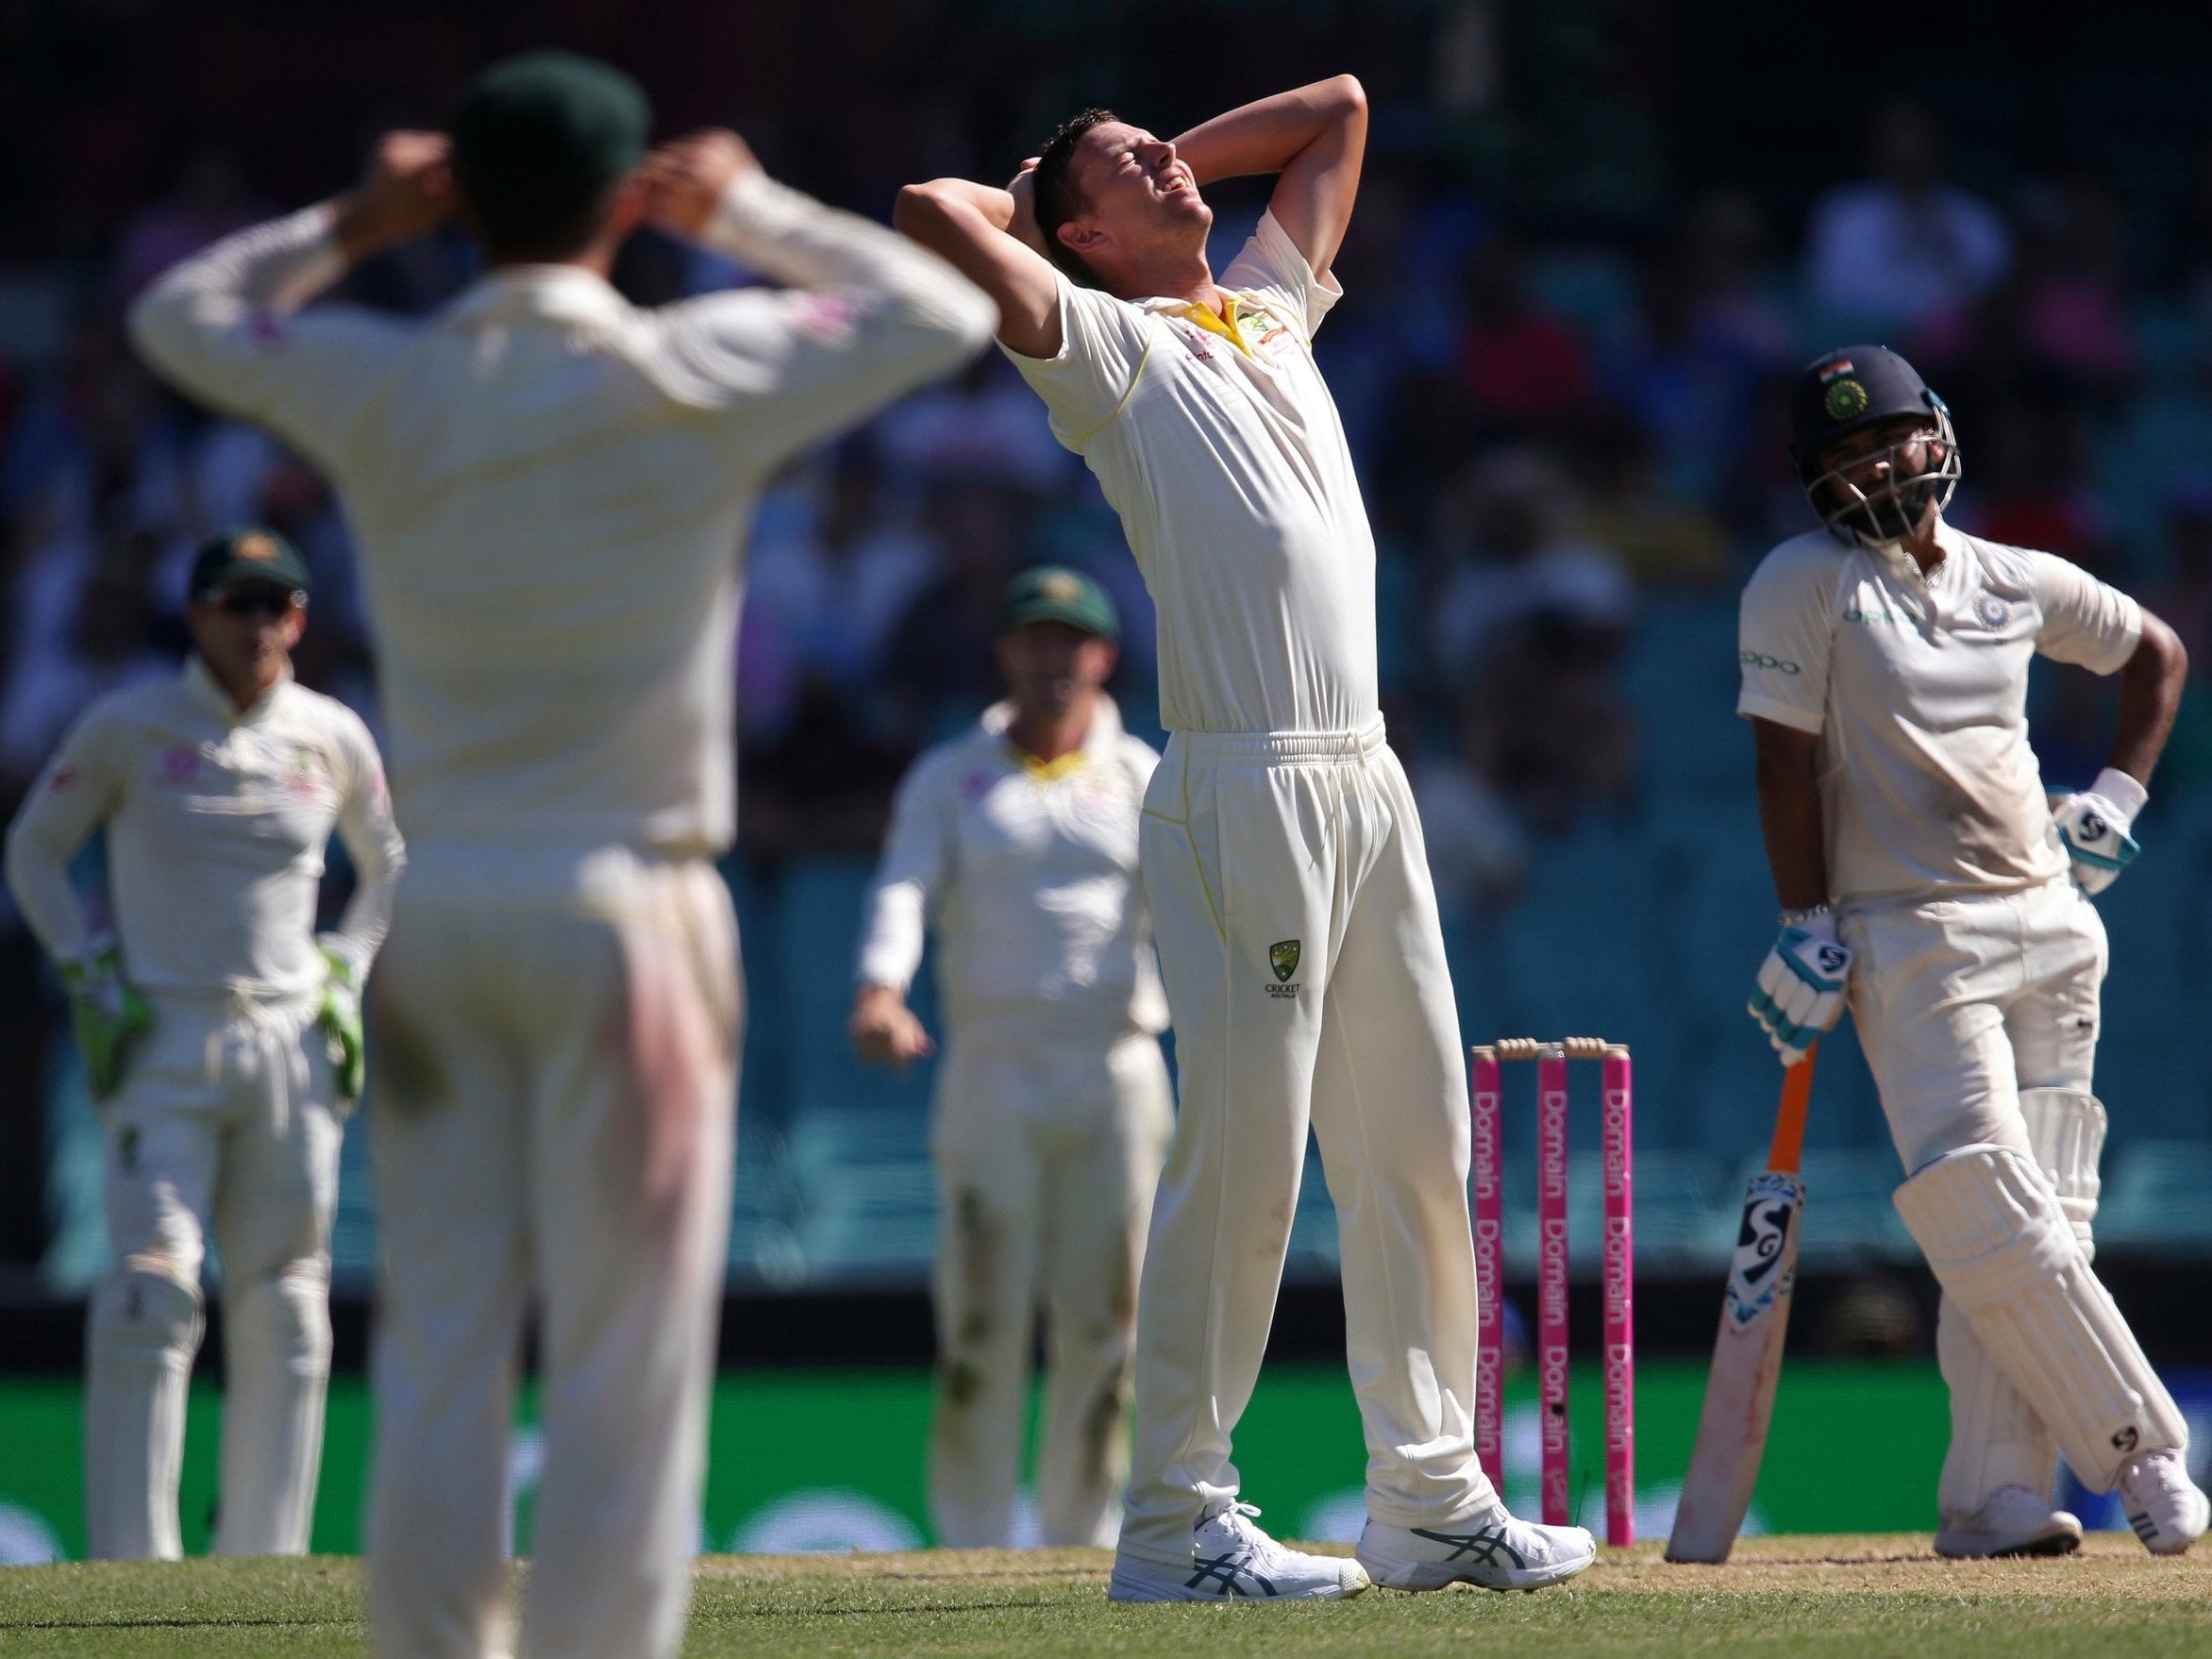 Australia are heading for an embarrassing home defeat